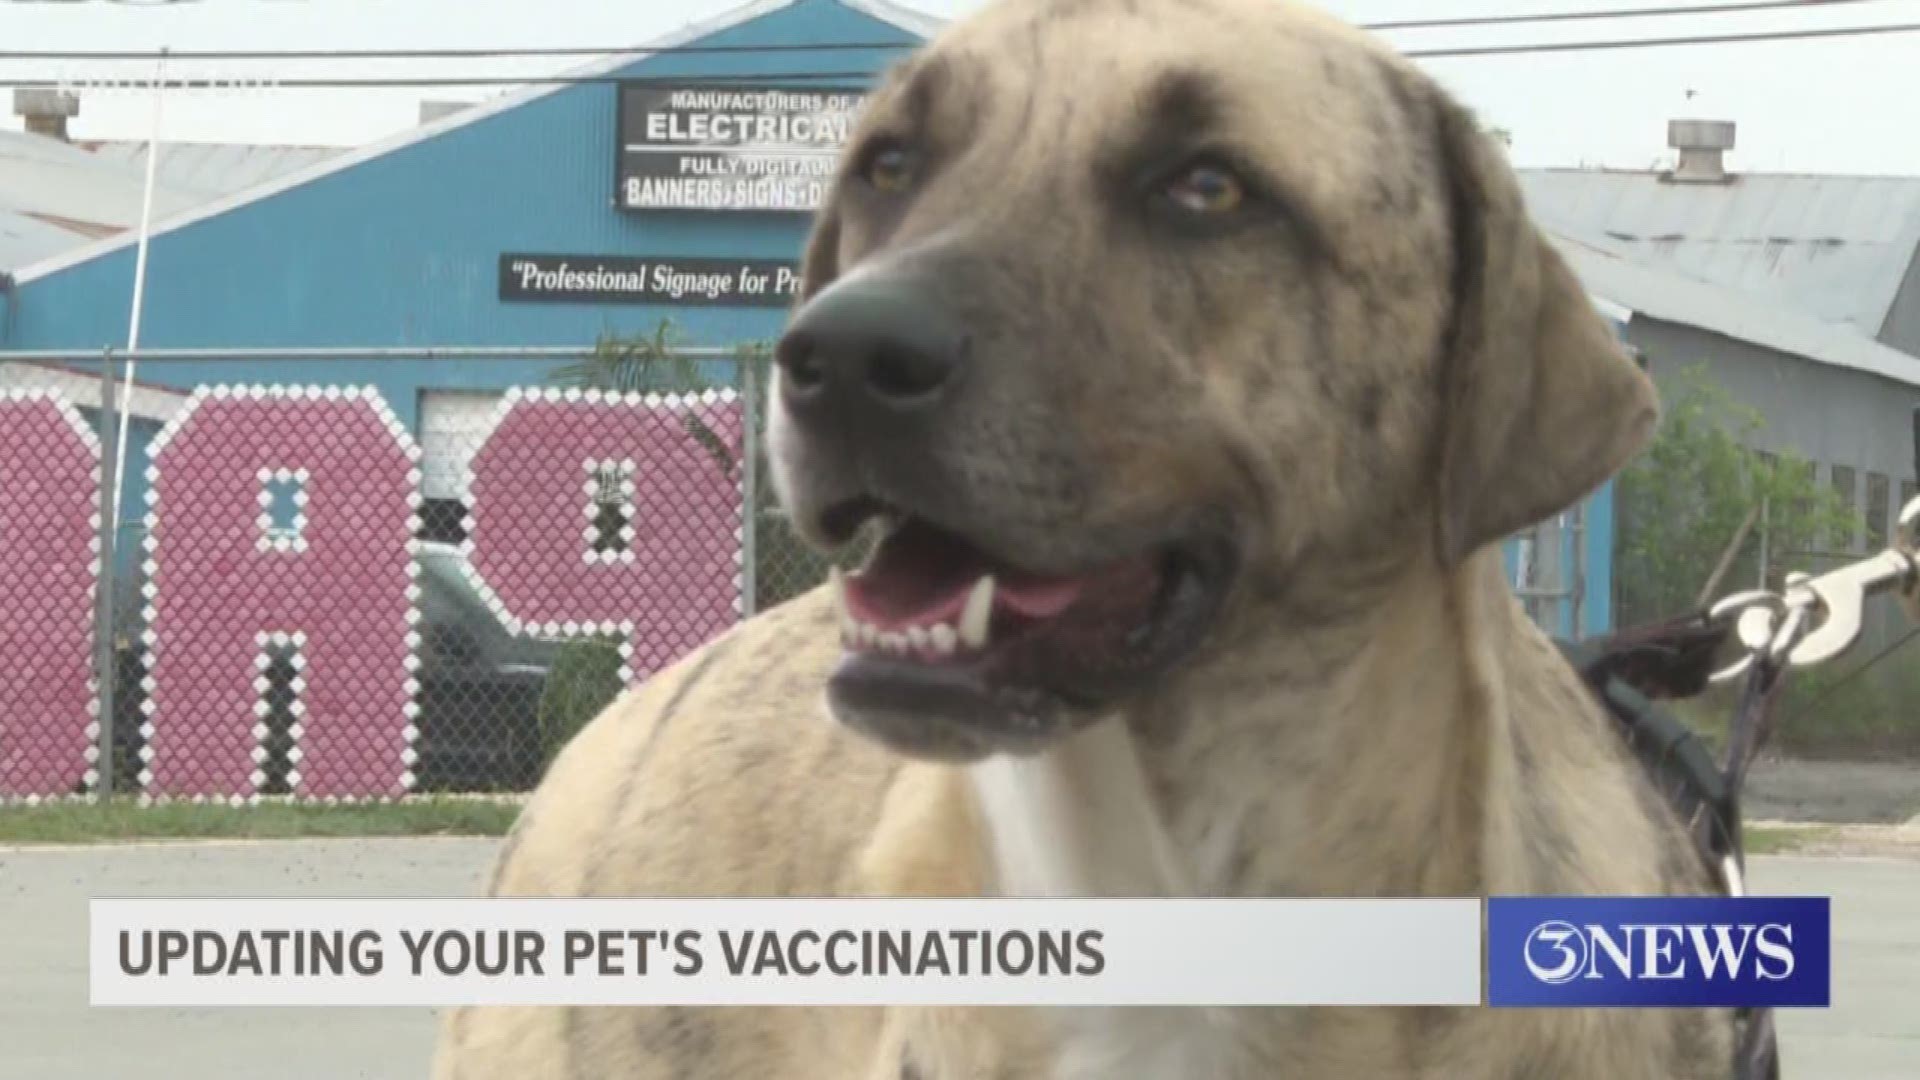 For those folks staying home because of the threat of the virus it might be a good time to get your animals vaccinations up-to-date.